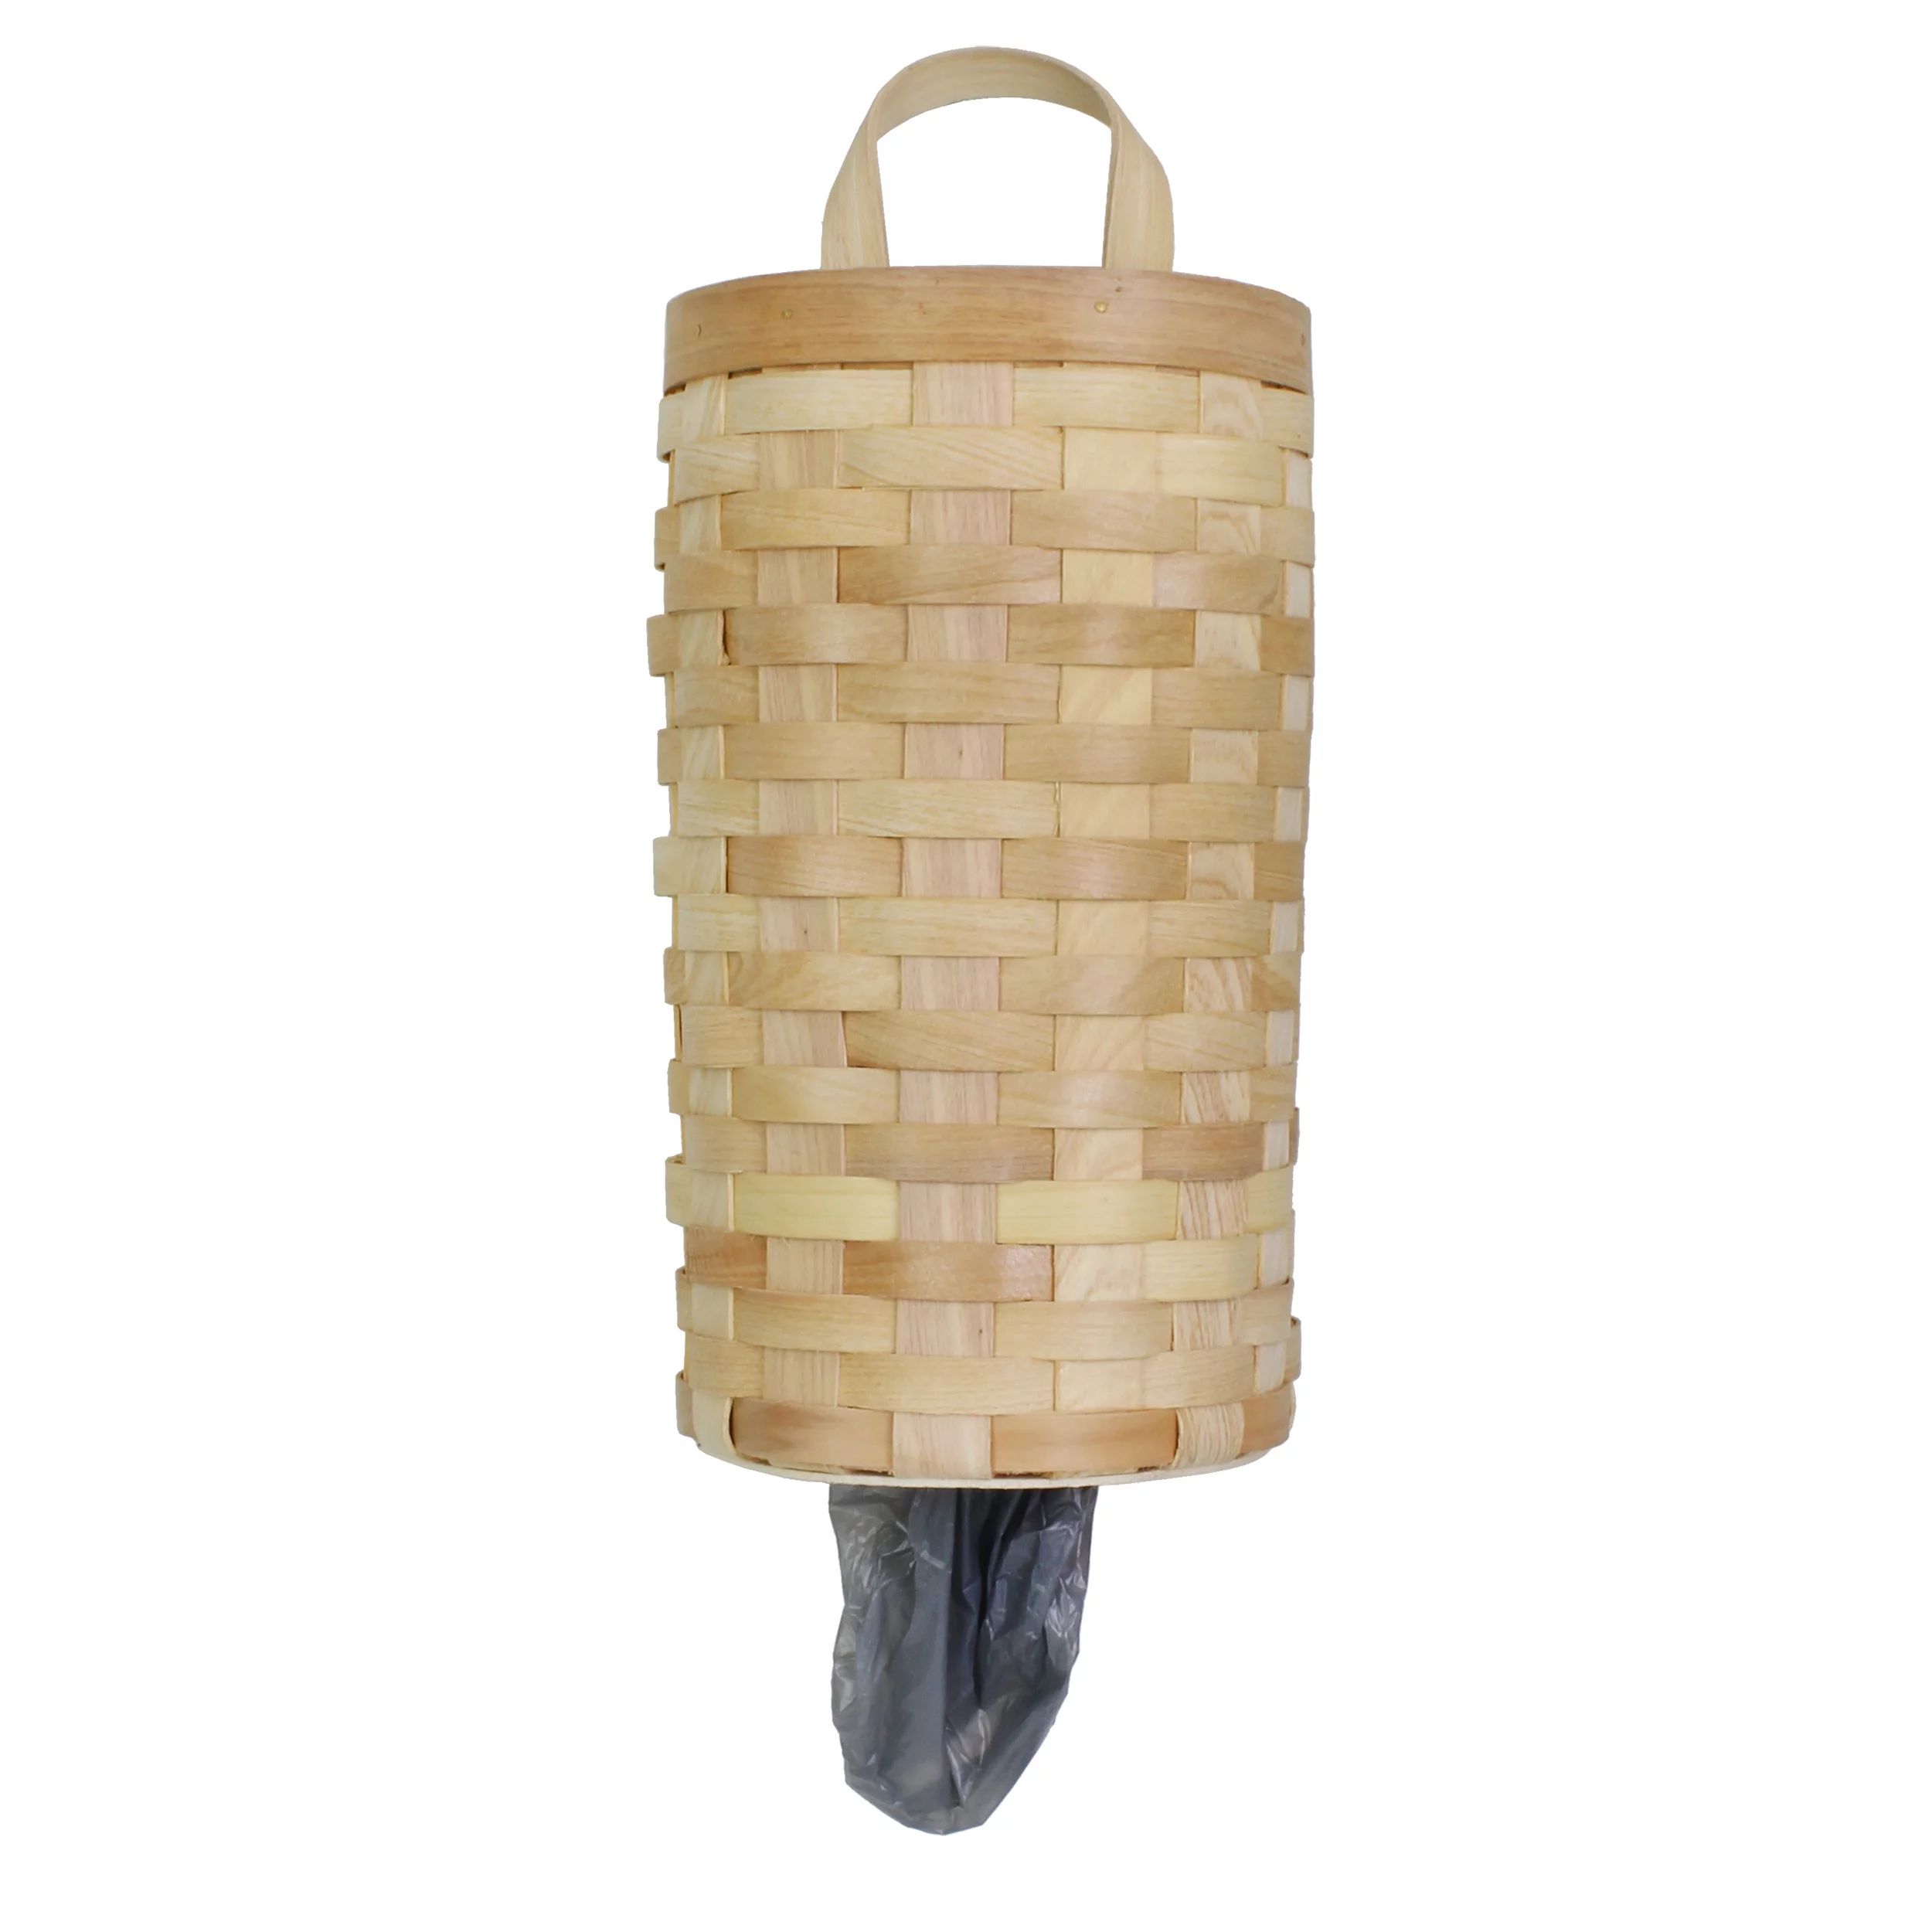 AuldHome Wicker Grocery Bag Holder (Natural); Wall-Mounted Rustic Farmhouse Plastic Bag Dispenser... | Walmart (US)